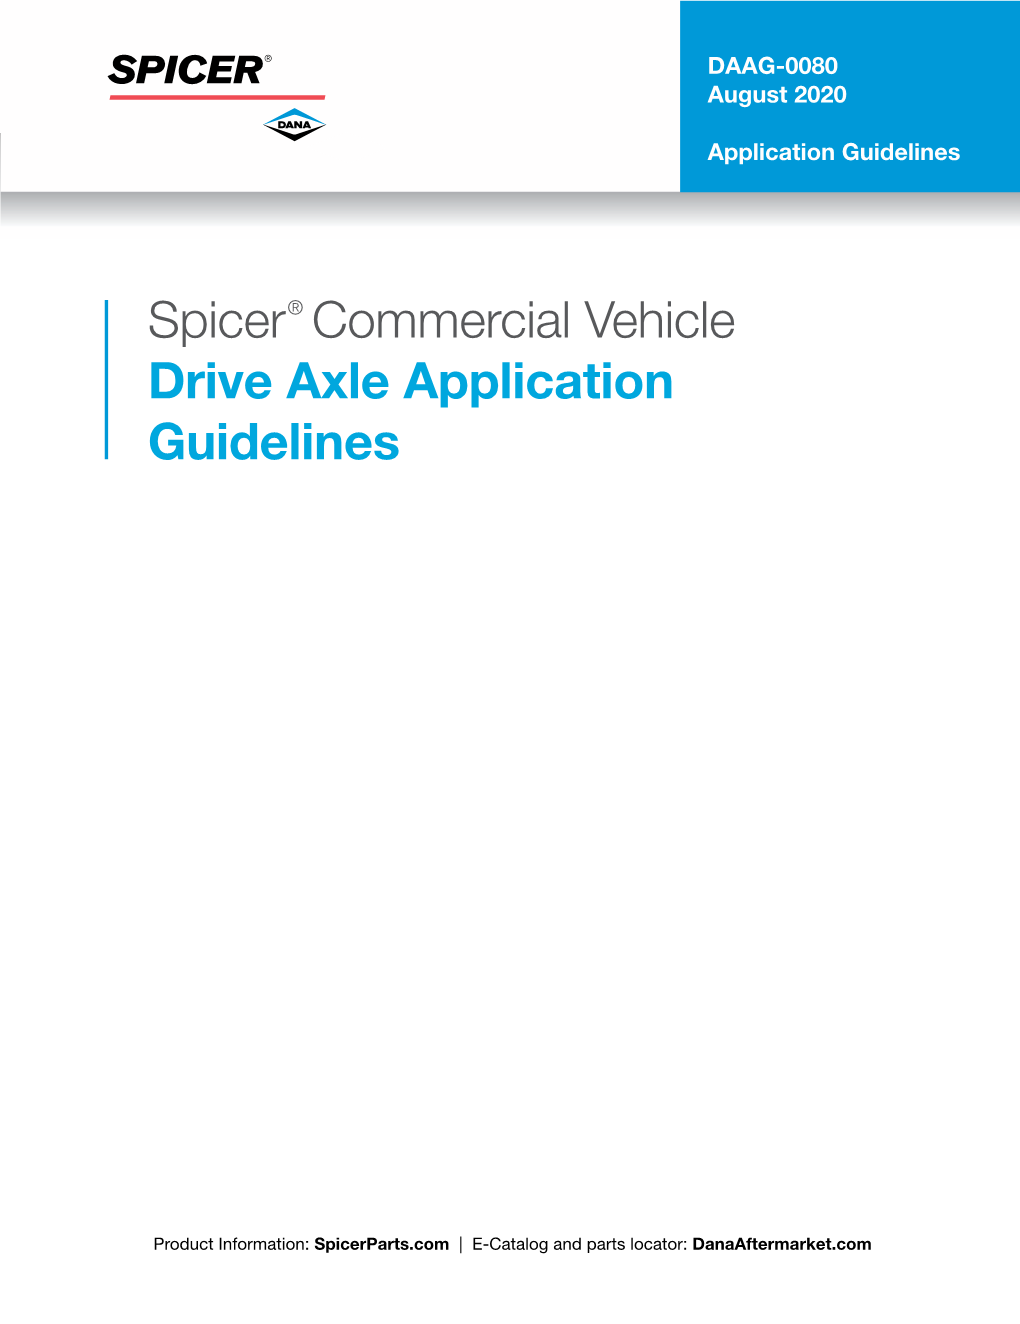 Spicer® Commercial Vehicle Drive Axle Application Guidelines